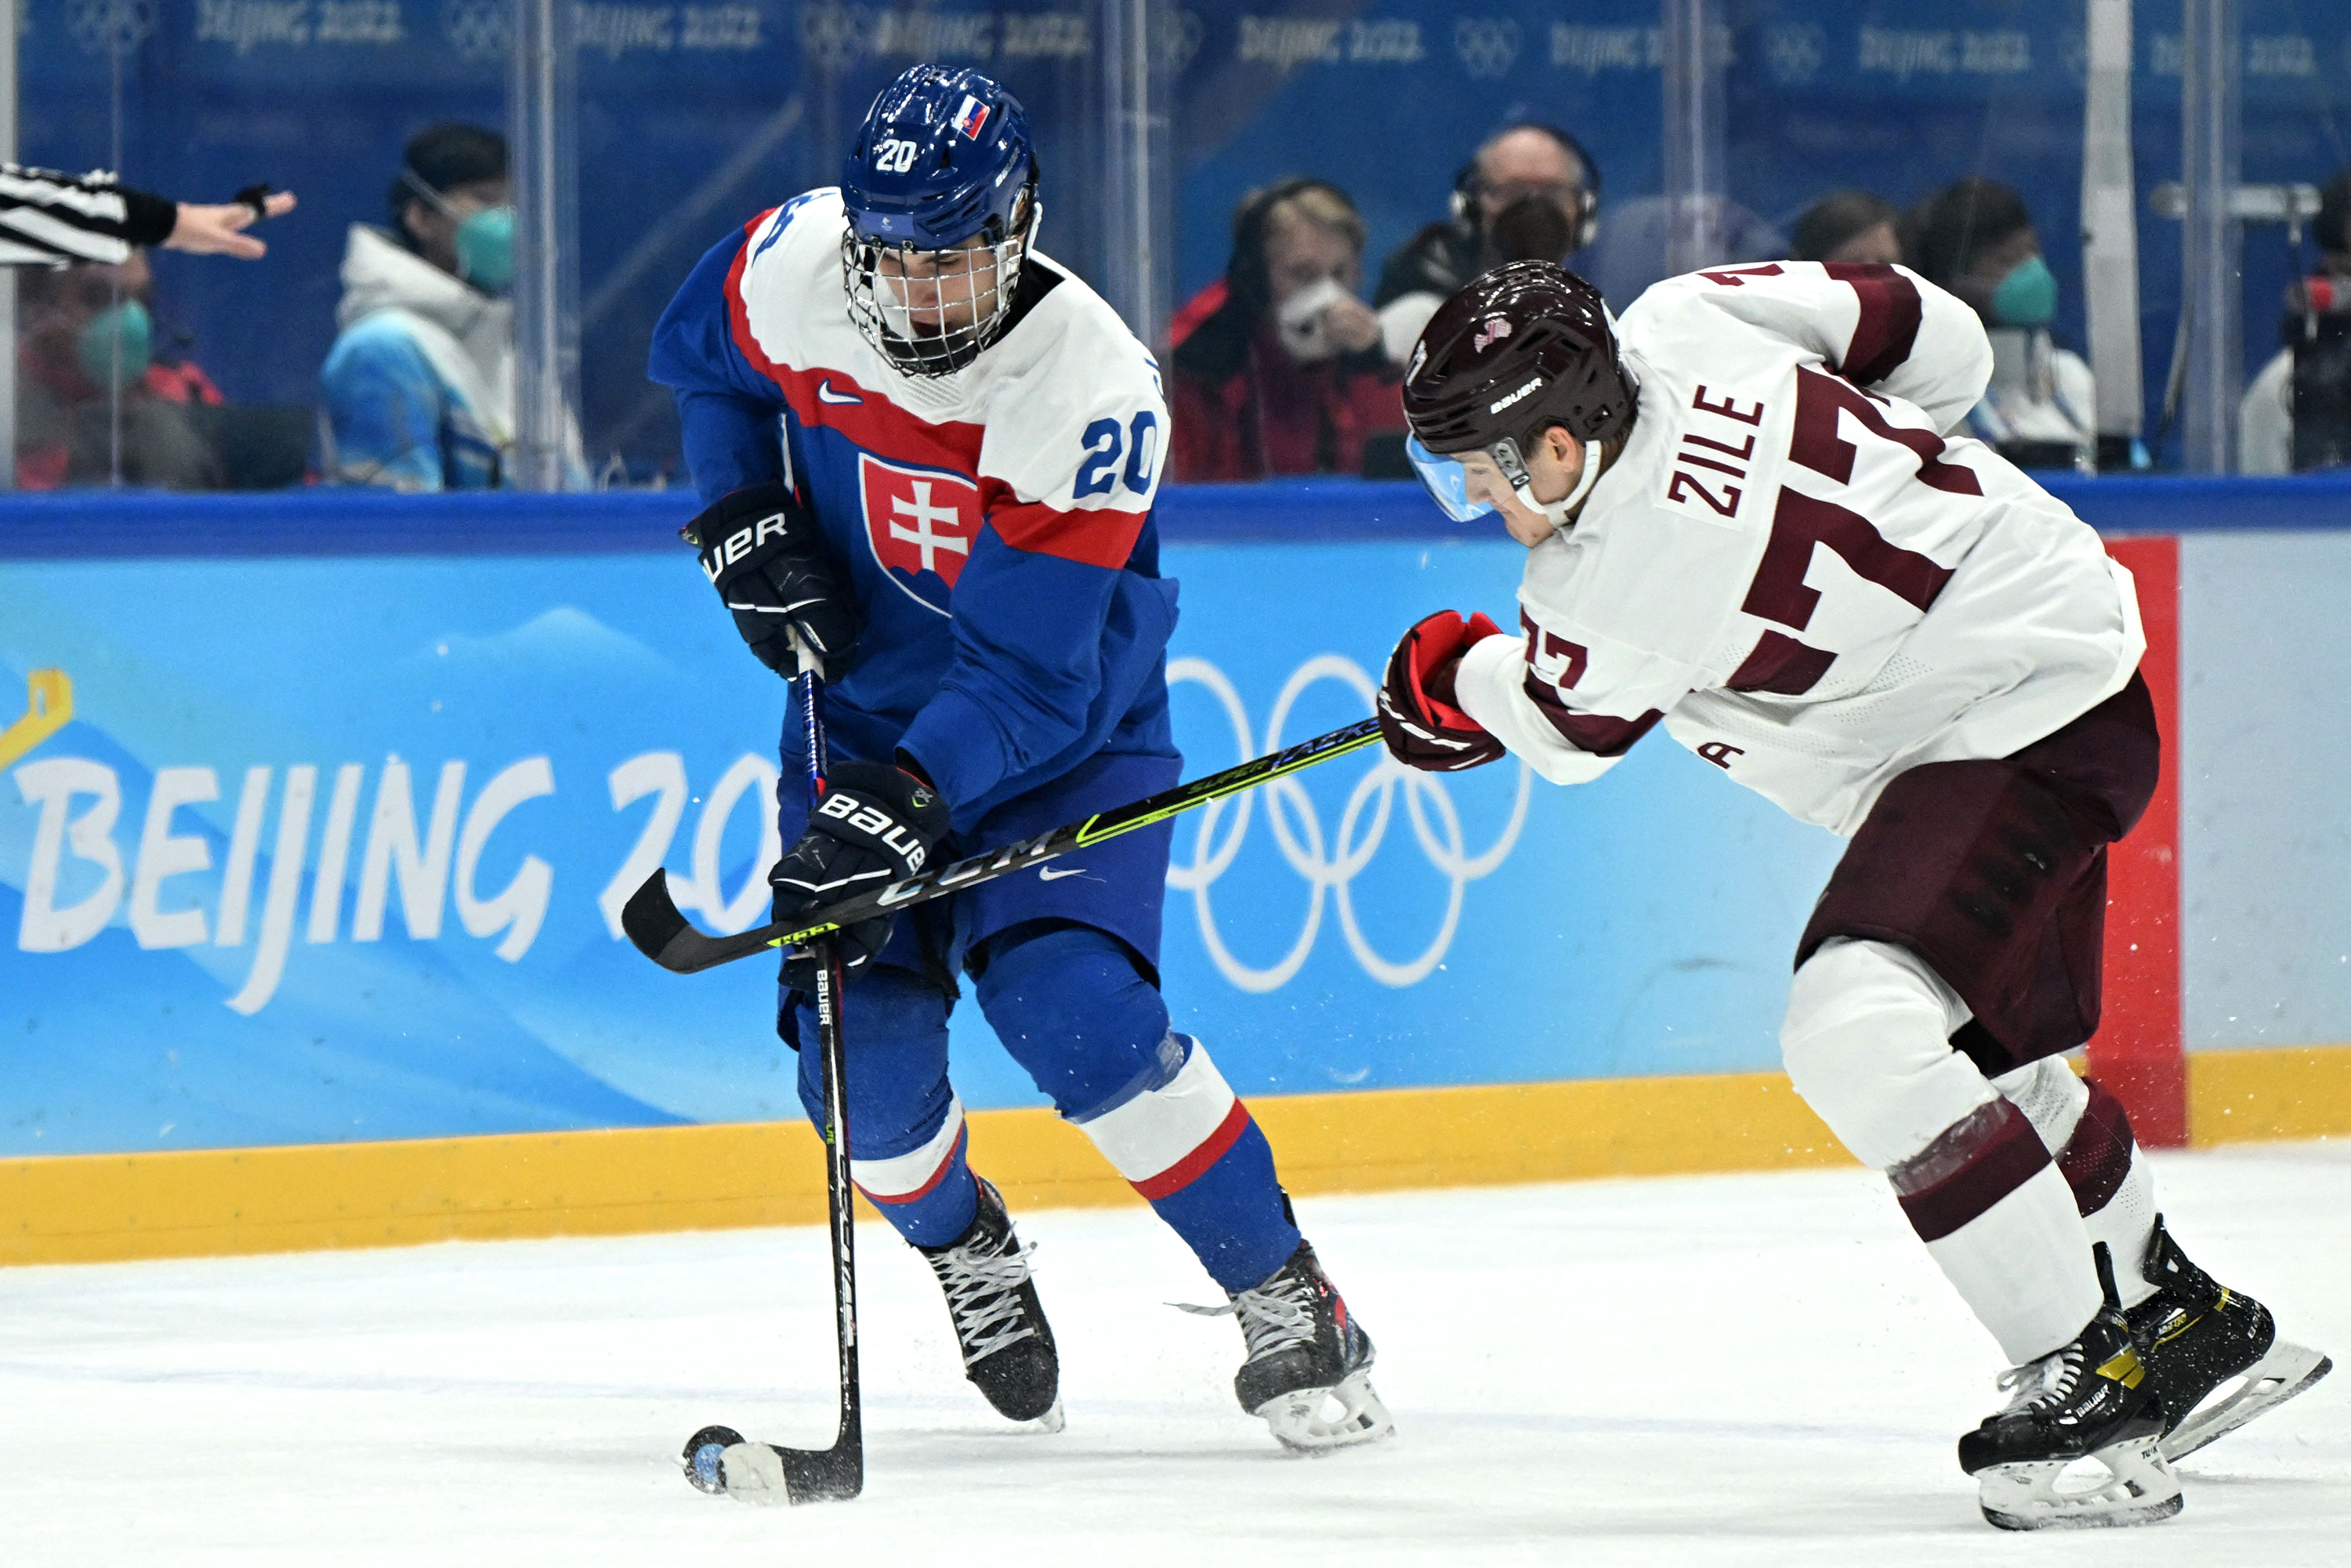 Slovakia's Juraj Slafkovský, left, and Latvia's Kristaps Roberts Zile fight for the puck during the men's preliminary round group C ice hockey competition on February 13.